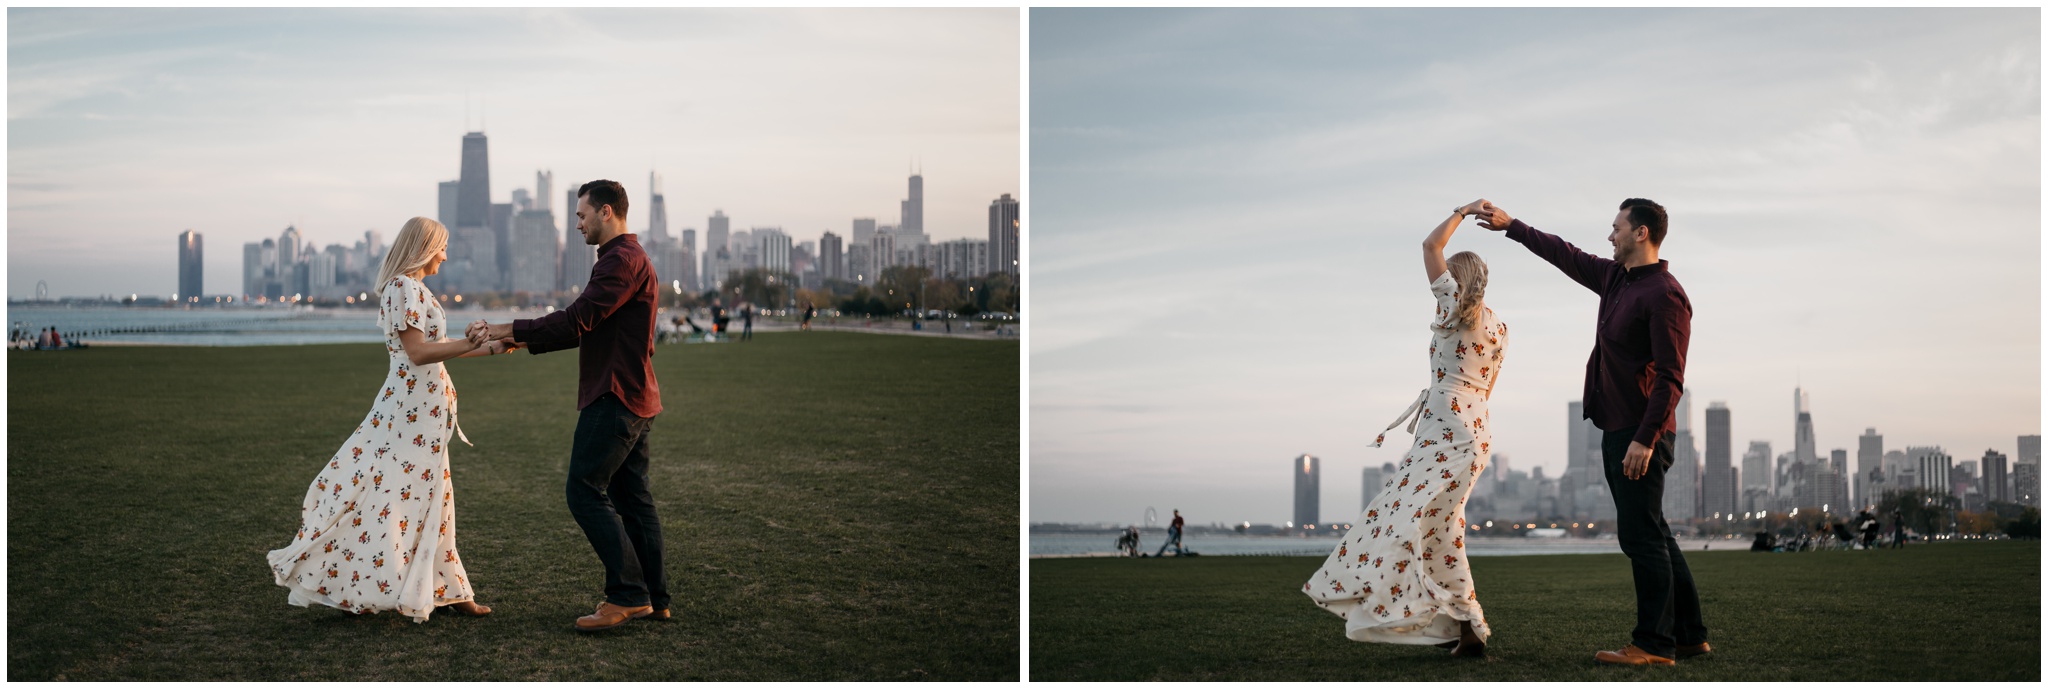 The Morros Wedding Photography Melissa and Anil Downtown Chicago Engagement Session_0462.jpg